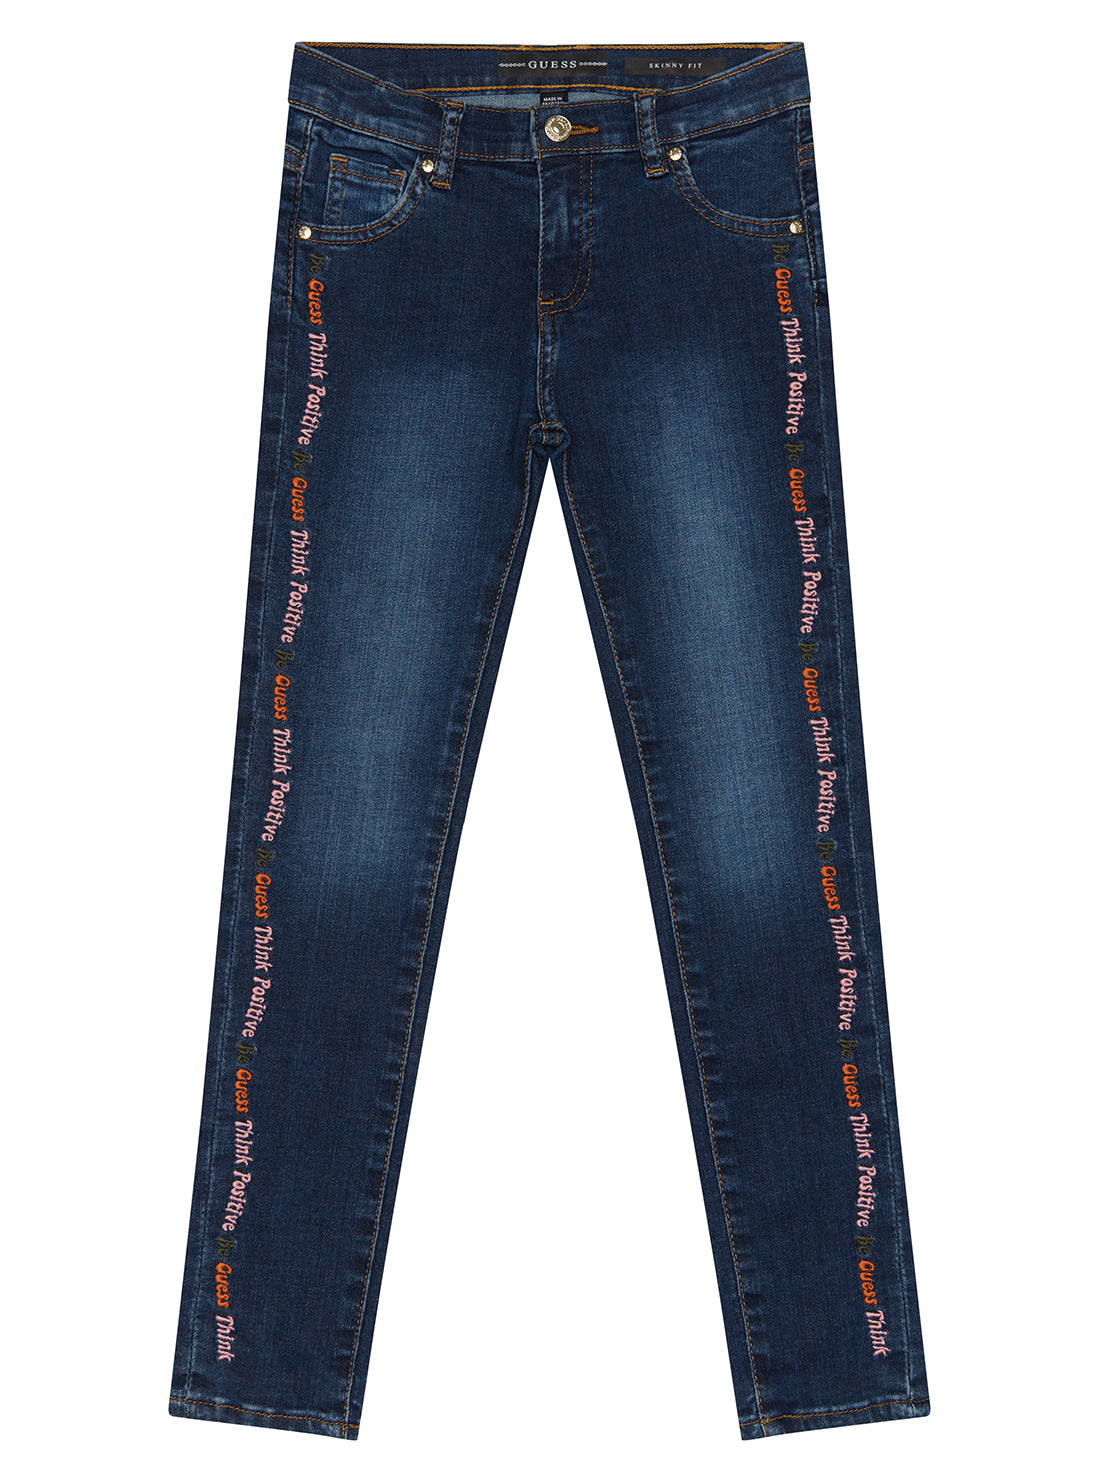 Think Positive Emby Denim Skinny Jeans | GUESS Kids | front view